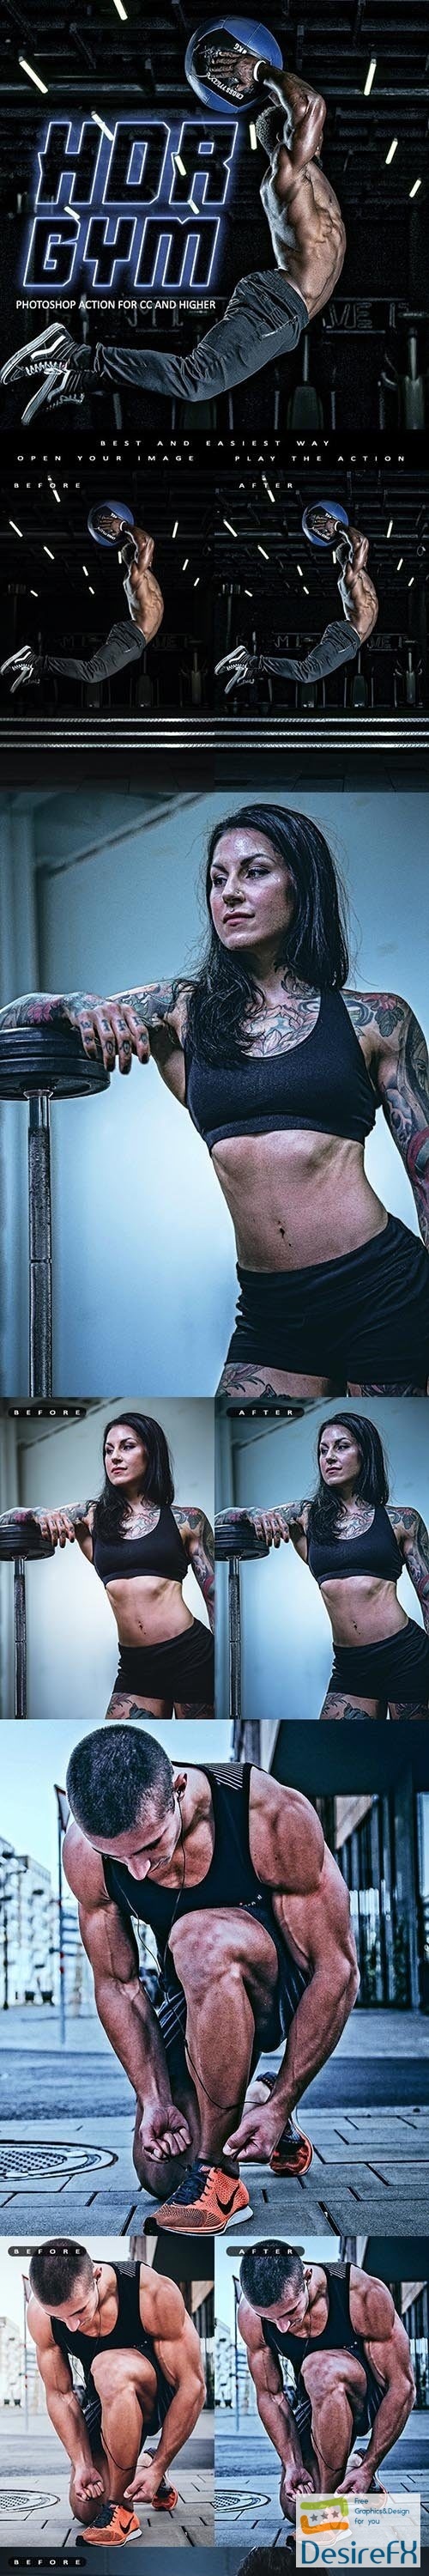 GraphicRiver - HDR GYM - Photoshop Action 29927487